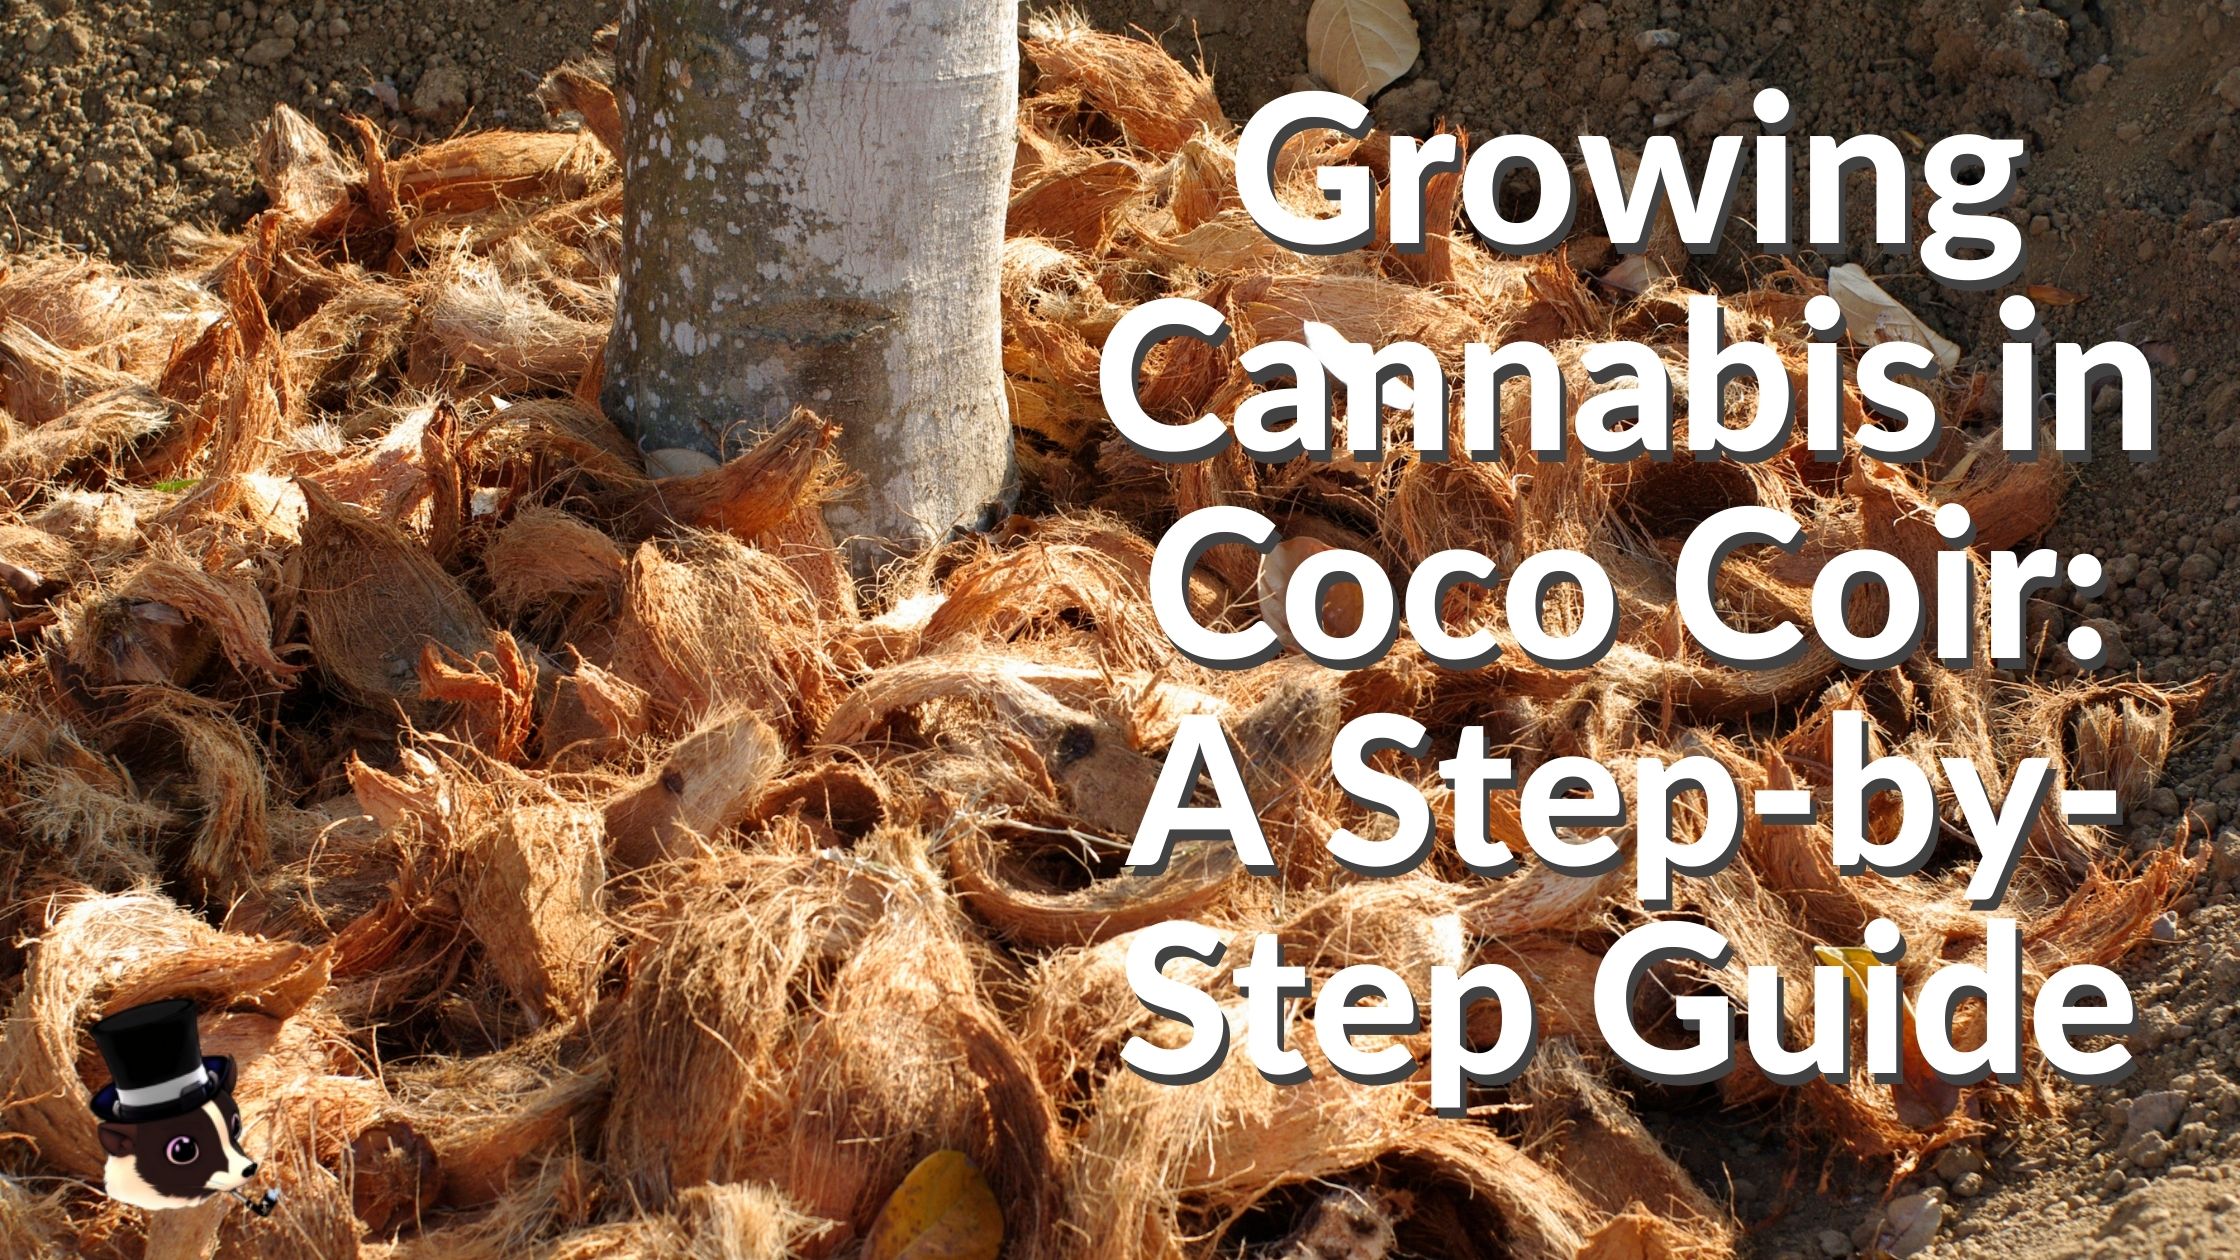 How to grow cannabis in coco coir? – The Coco Depot